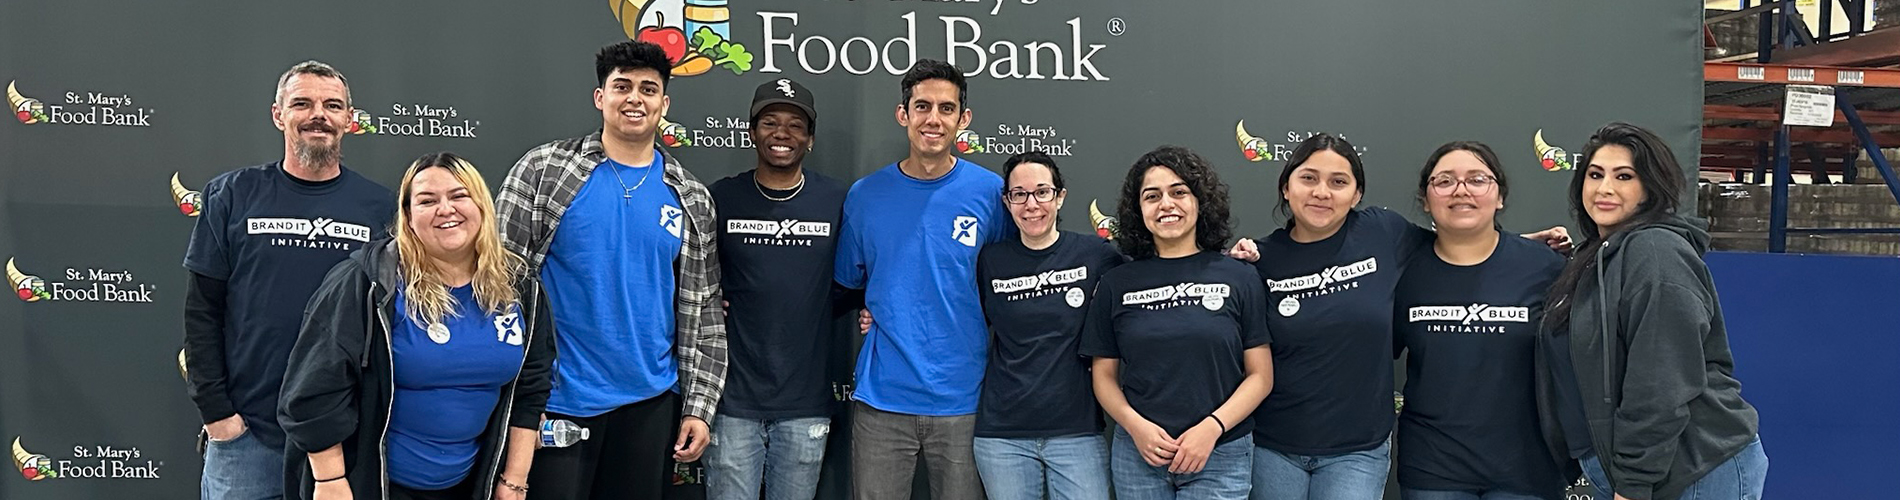 South Phoenix Employment Recruiters Volunteer at St Mary's Food Bank